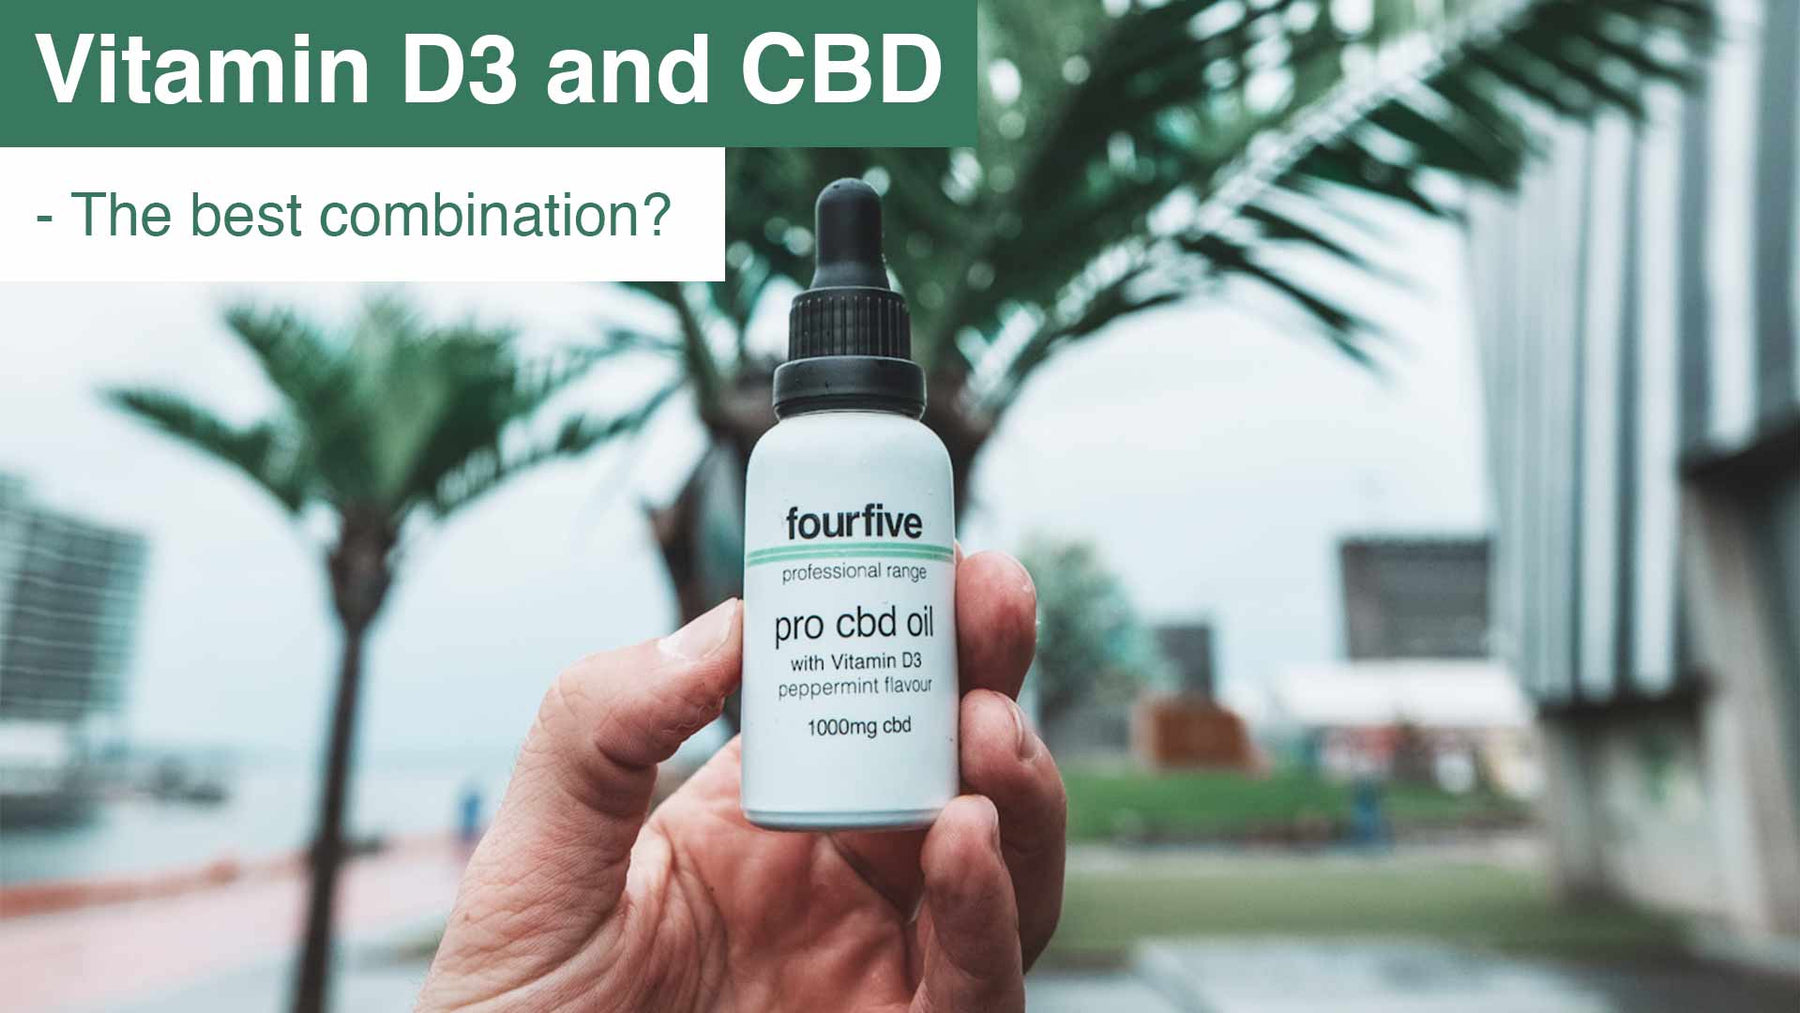 Vitamin D3 and CBD - The Best Combination?